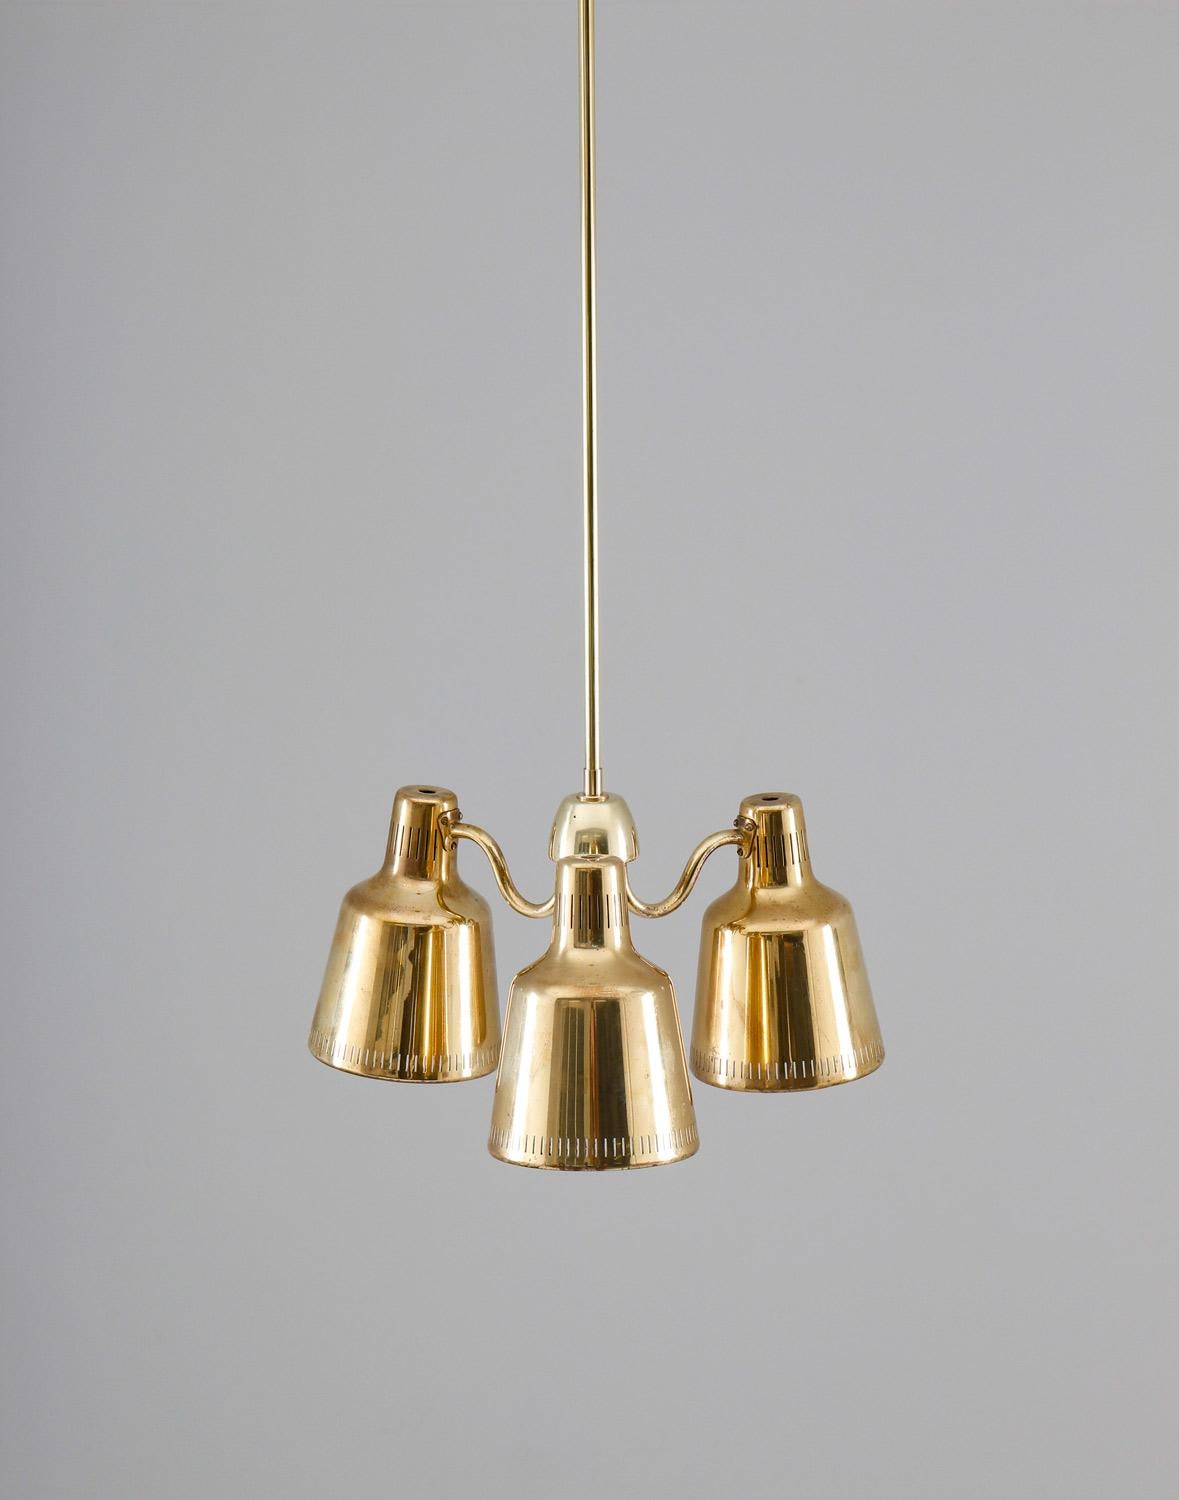 Swedish Modern Pendant in Brass In Good Condition For Sale In Karlstad, SE